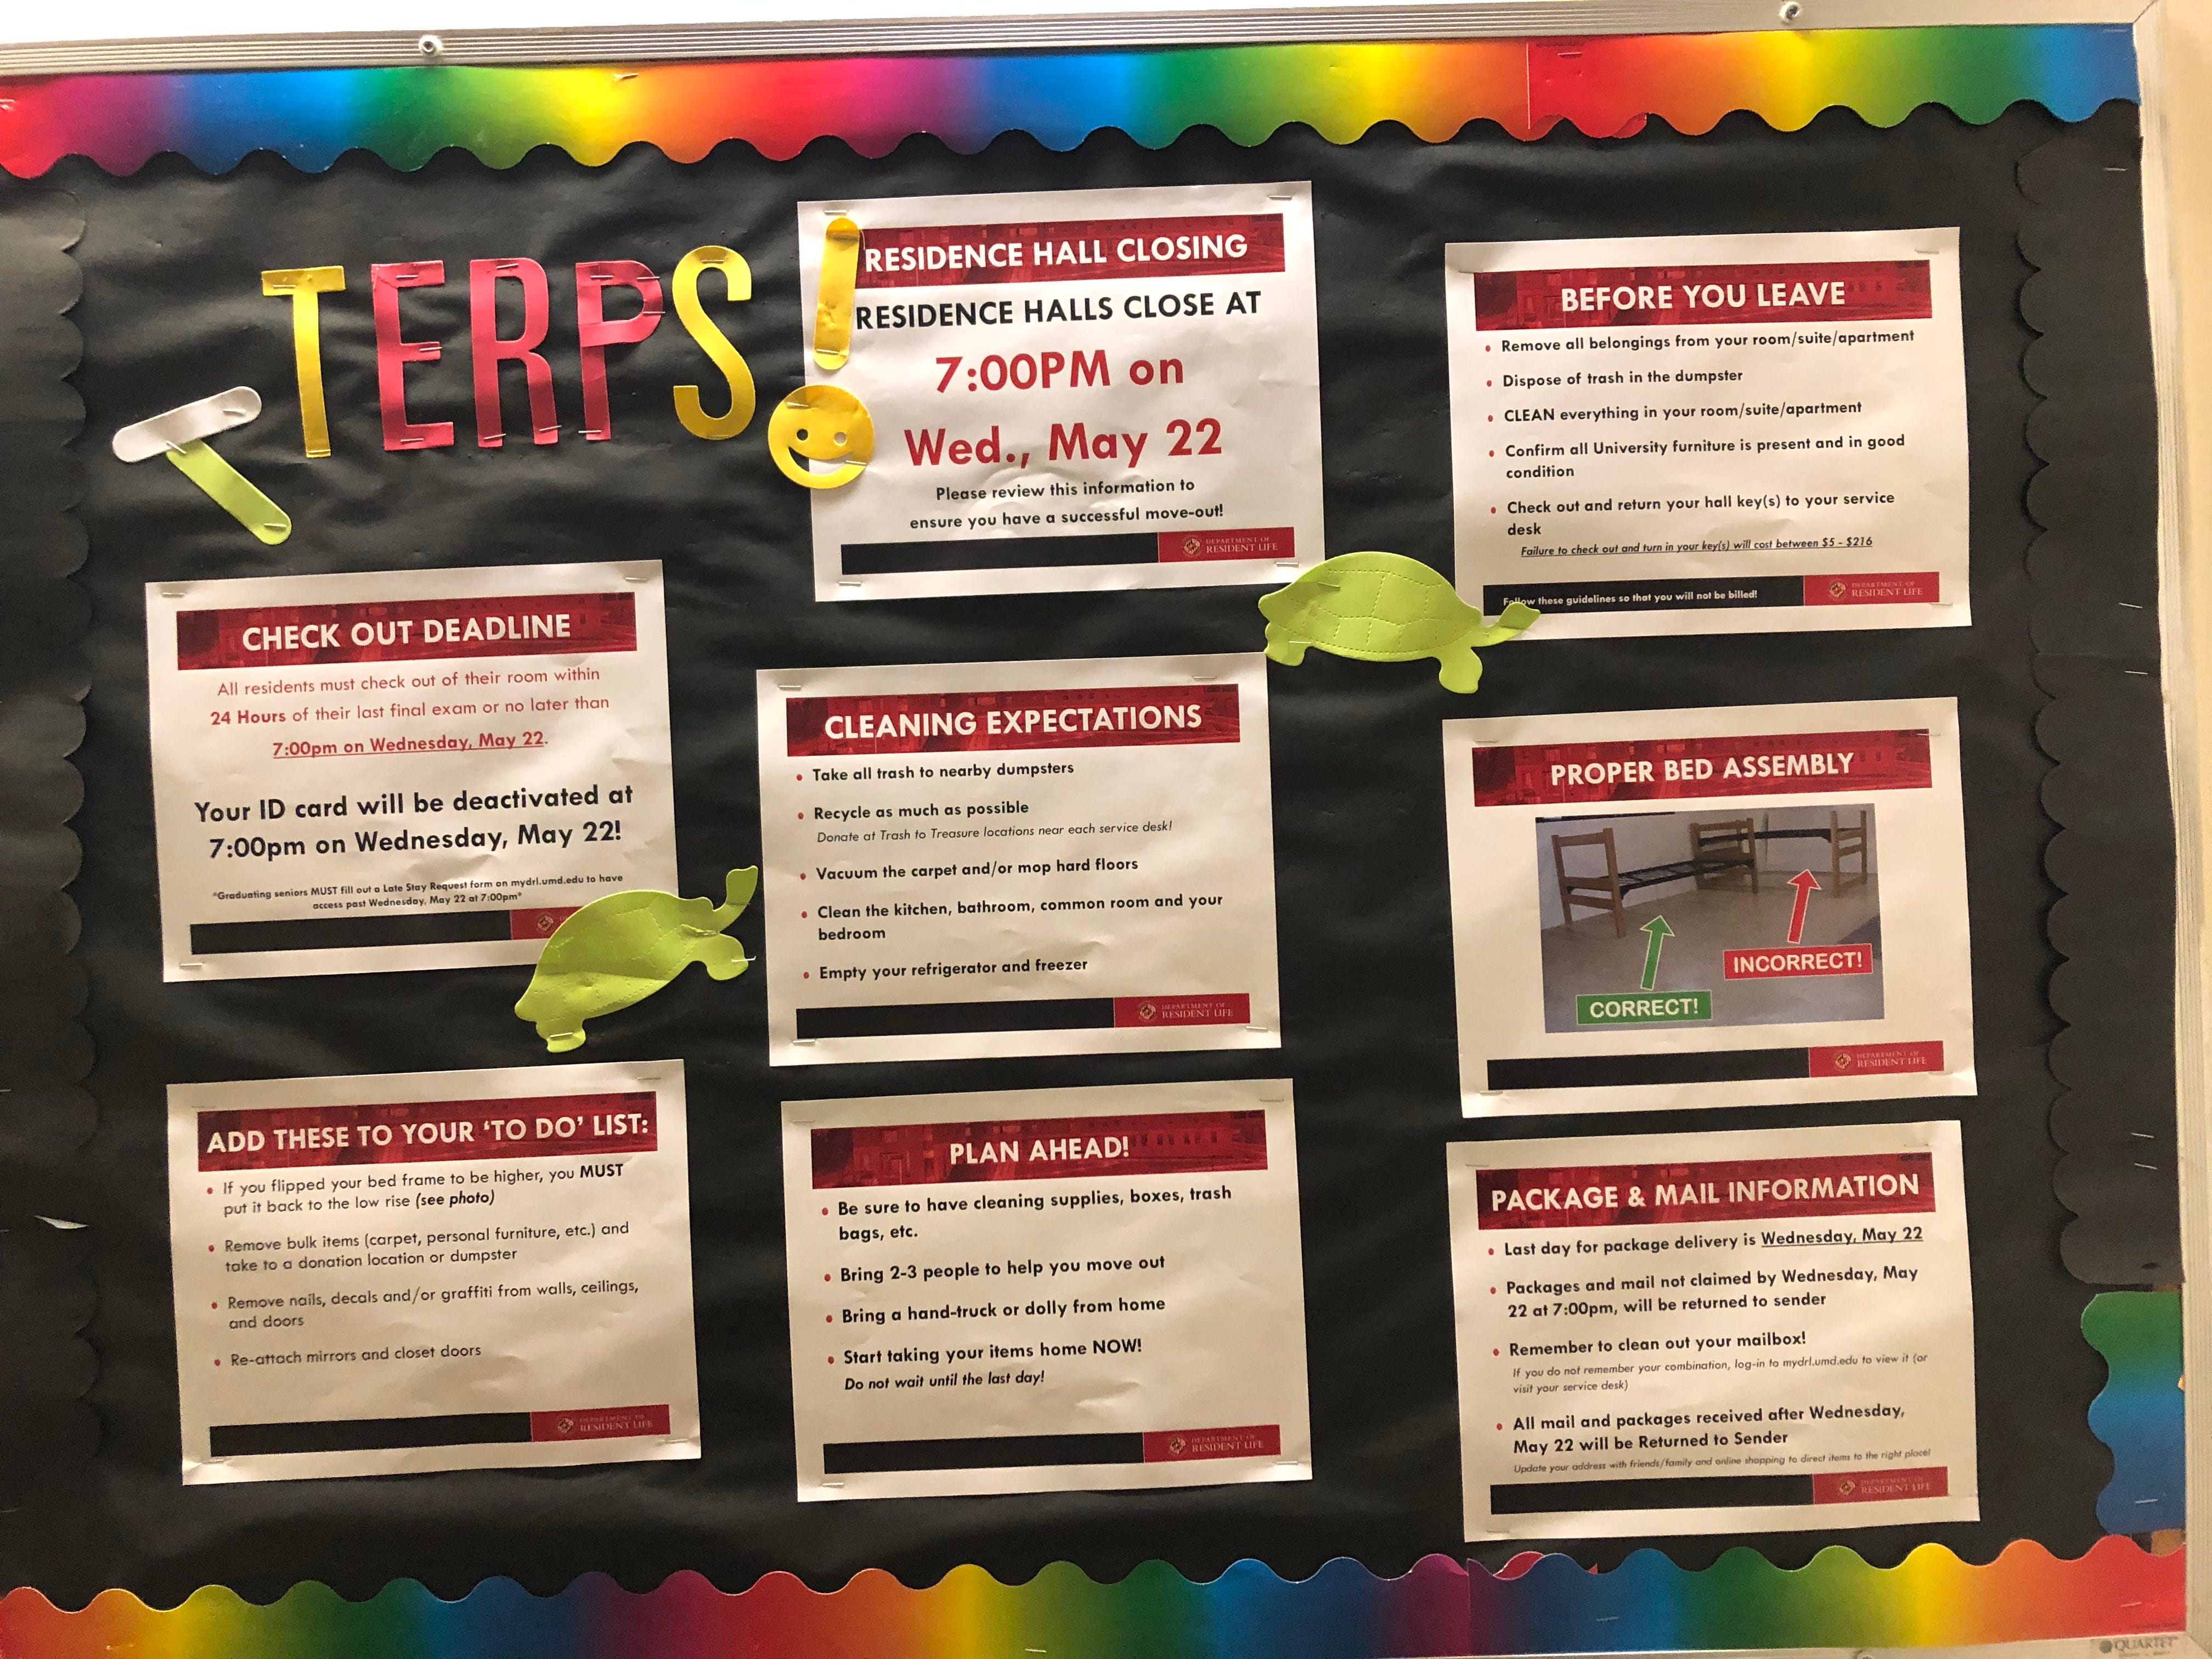 My Bulletin Boards As An Resident Assistant Ra At The University Of Maryland By Ali Bhatti Medium - let your kid play roblox and gain these 5 tech parenting superpowers by katie salen tekinbas connected parenting medium